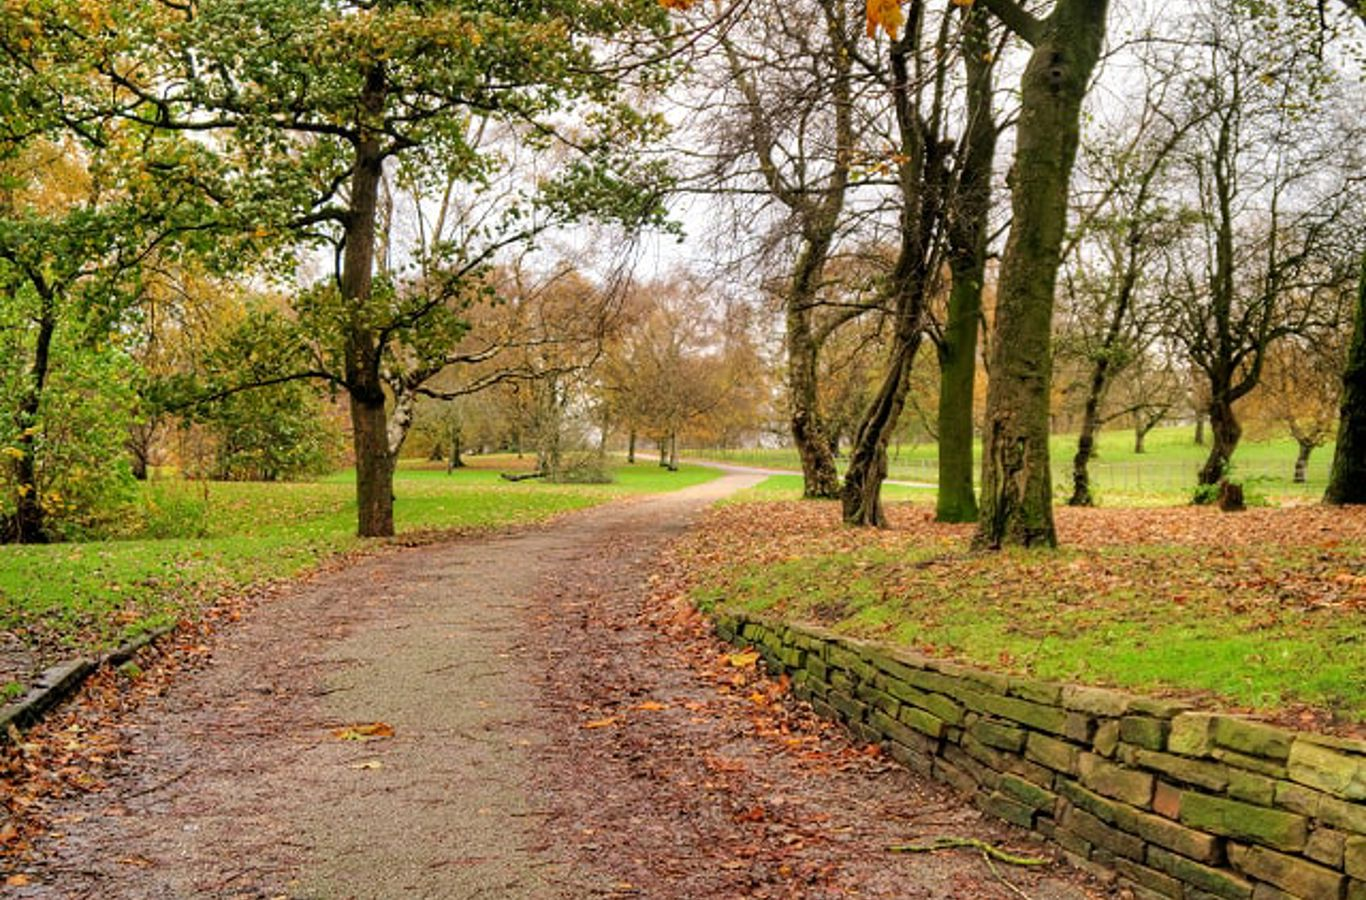 https://www.northerngroup.co.uk/media/yp5amsnl/path_into_heaton_park_-_geograph-org-uk_-_4741694-min.jpg?quality=80&mode=crop&height=900&width=1366&format=jpg